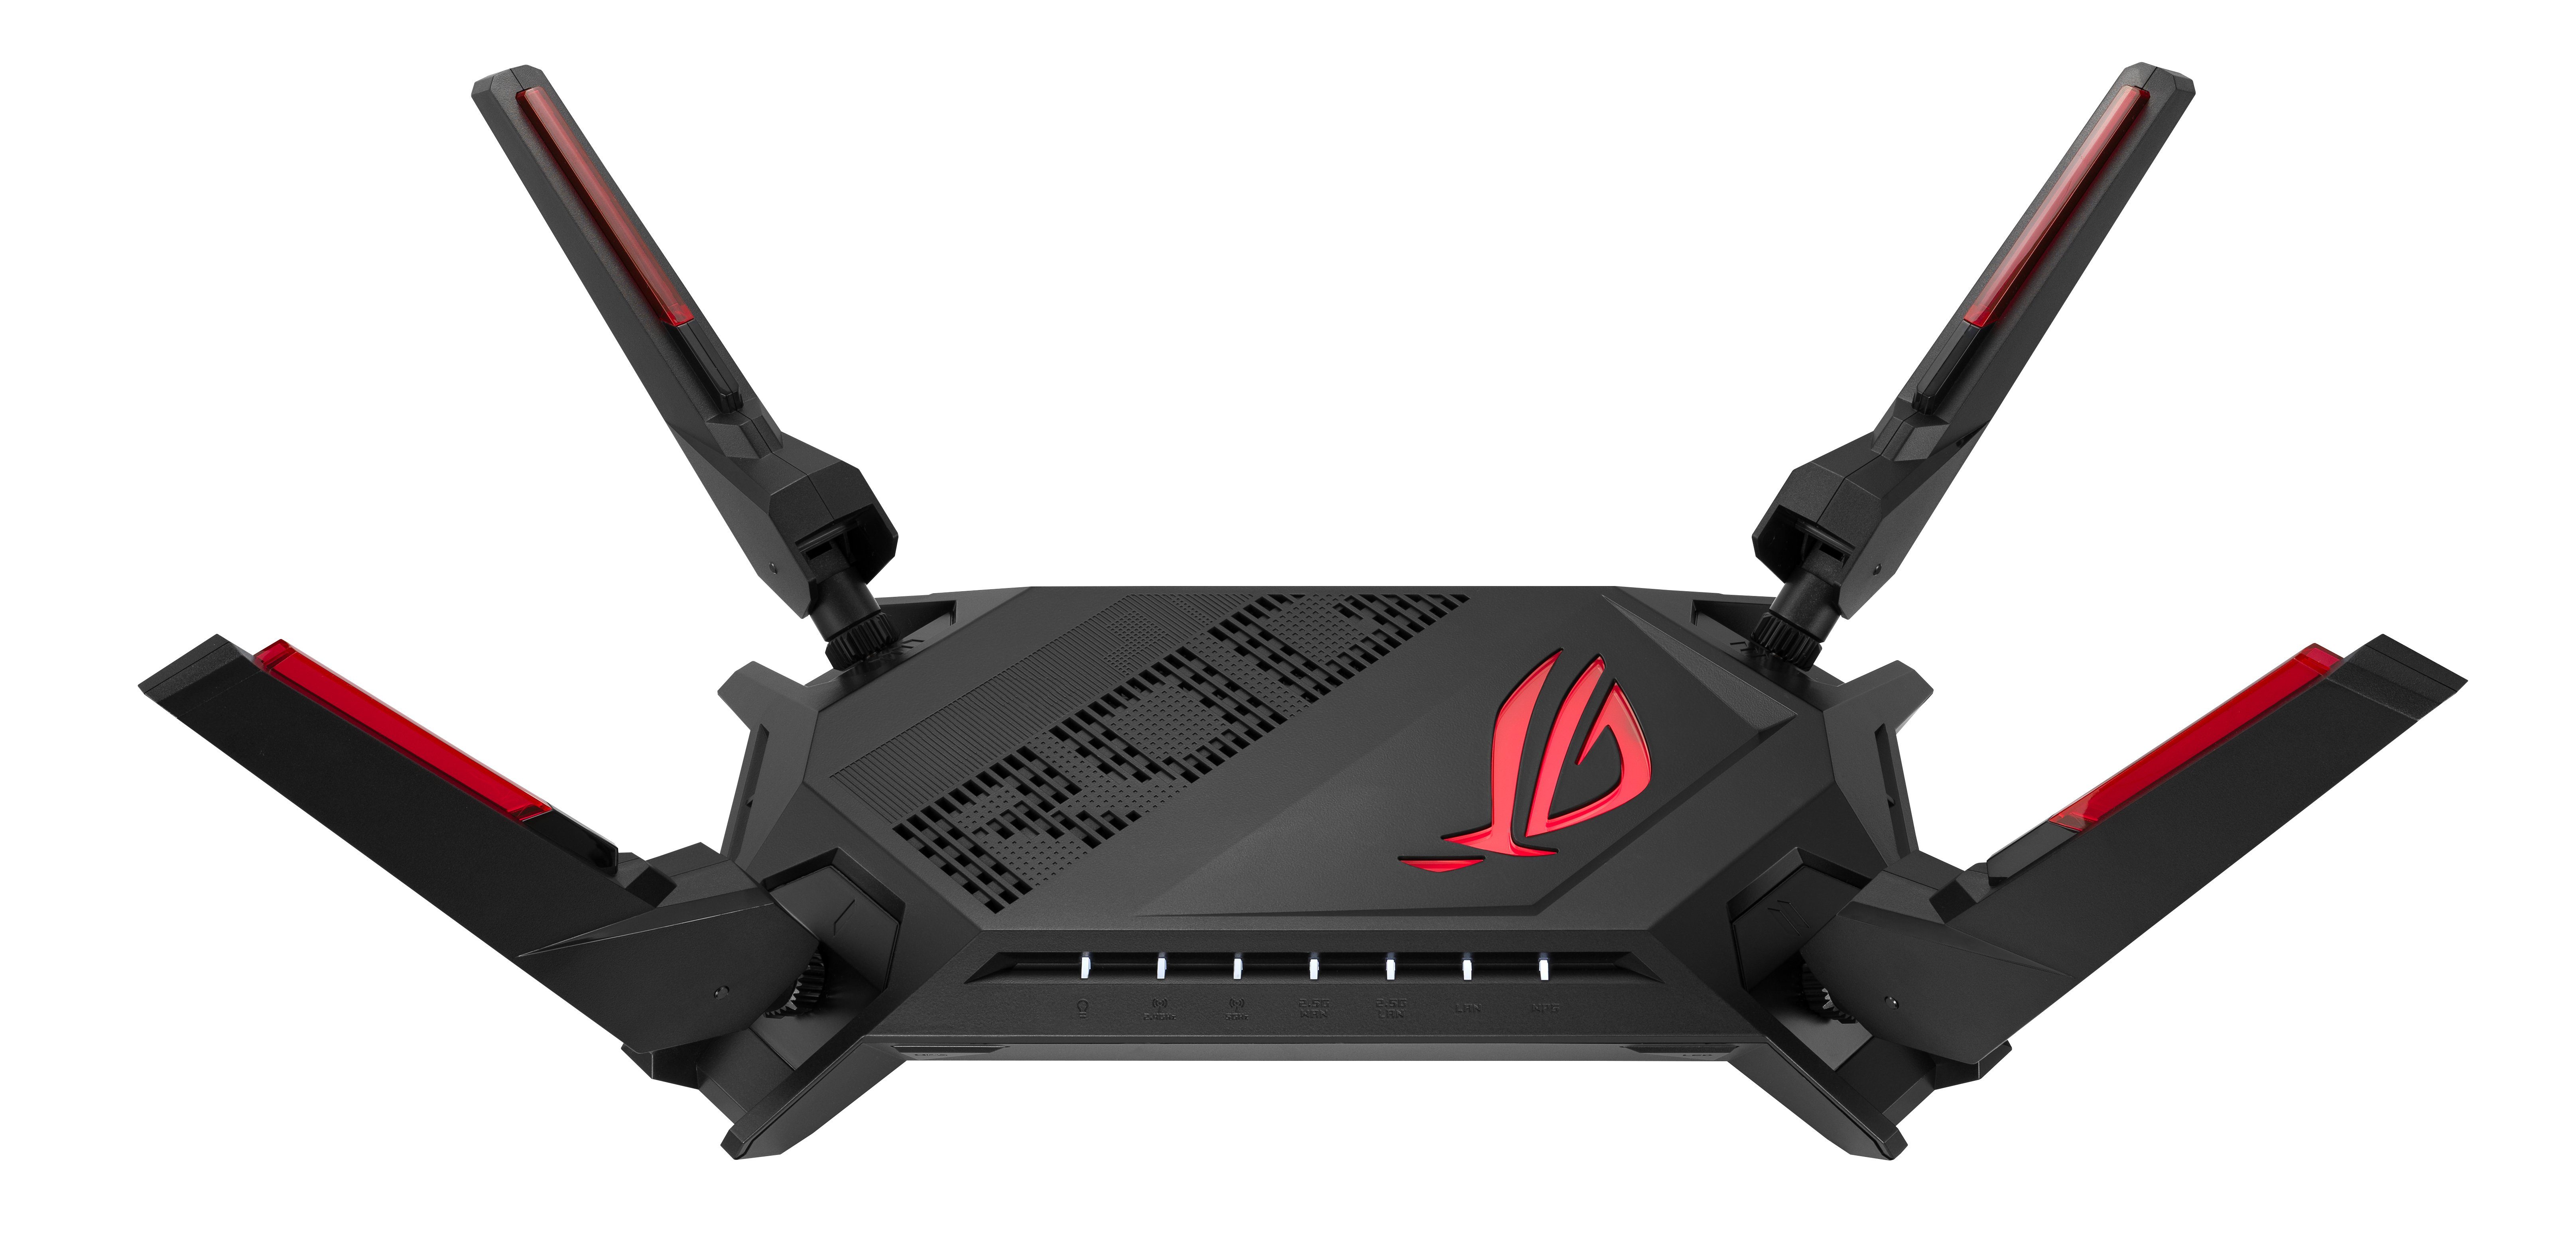 Asus Router Asus WiFi 6 GT-AX6000 AiMesh WLAN-Router